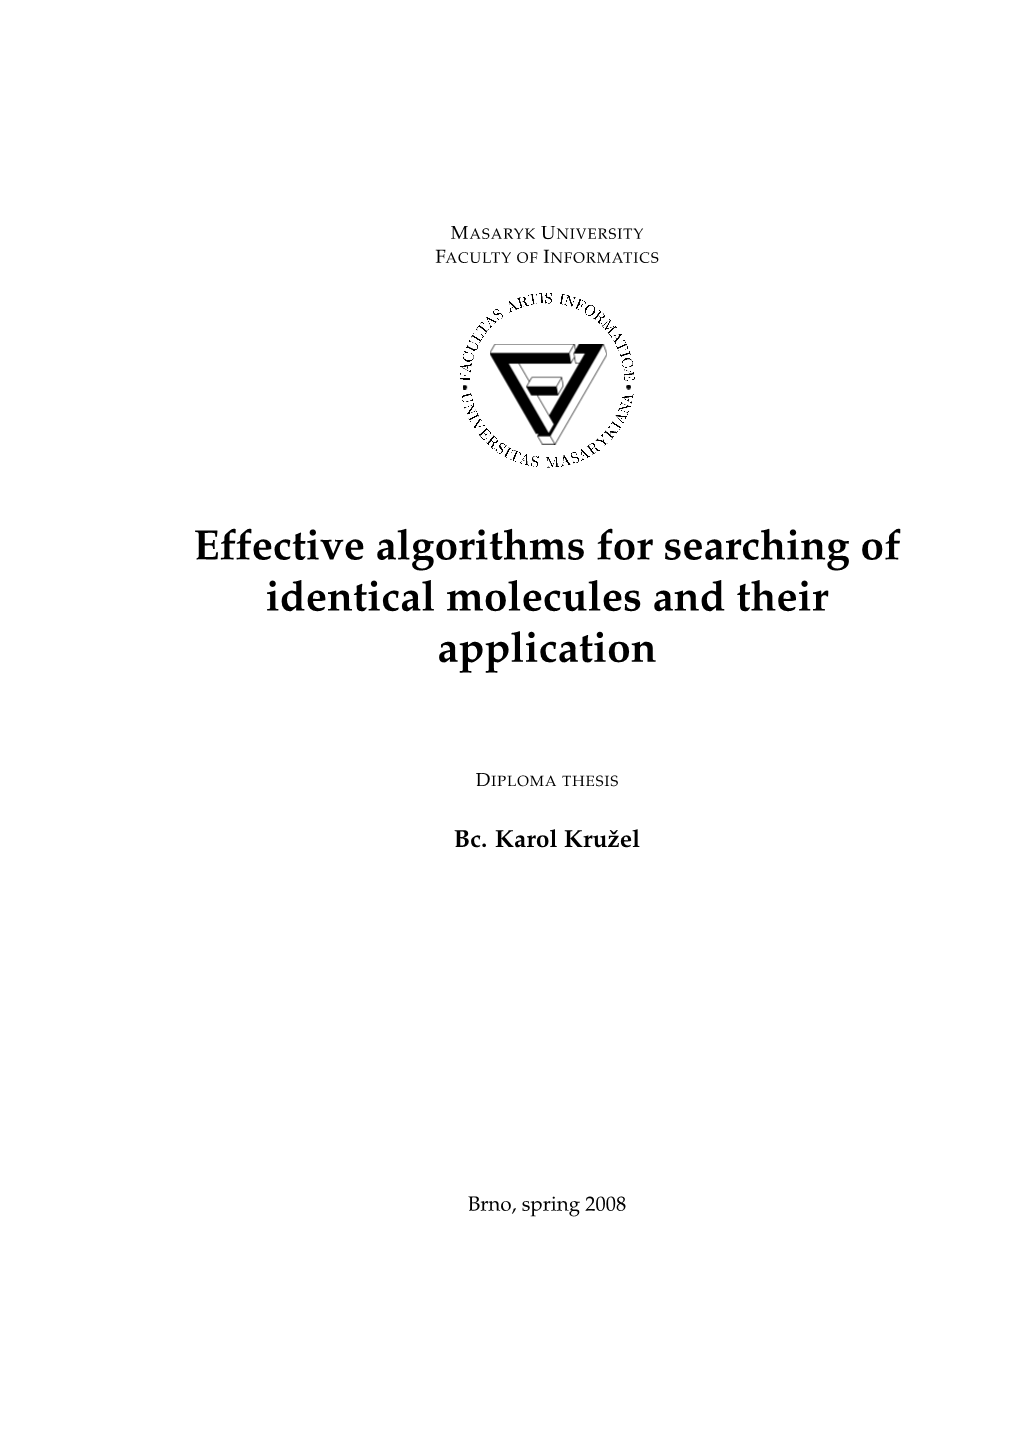 Effective Algorithms for Searching of Identical Molecules and Their Application